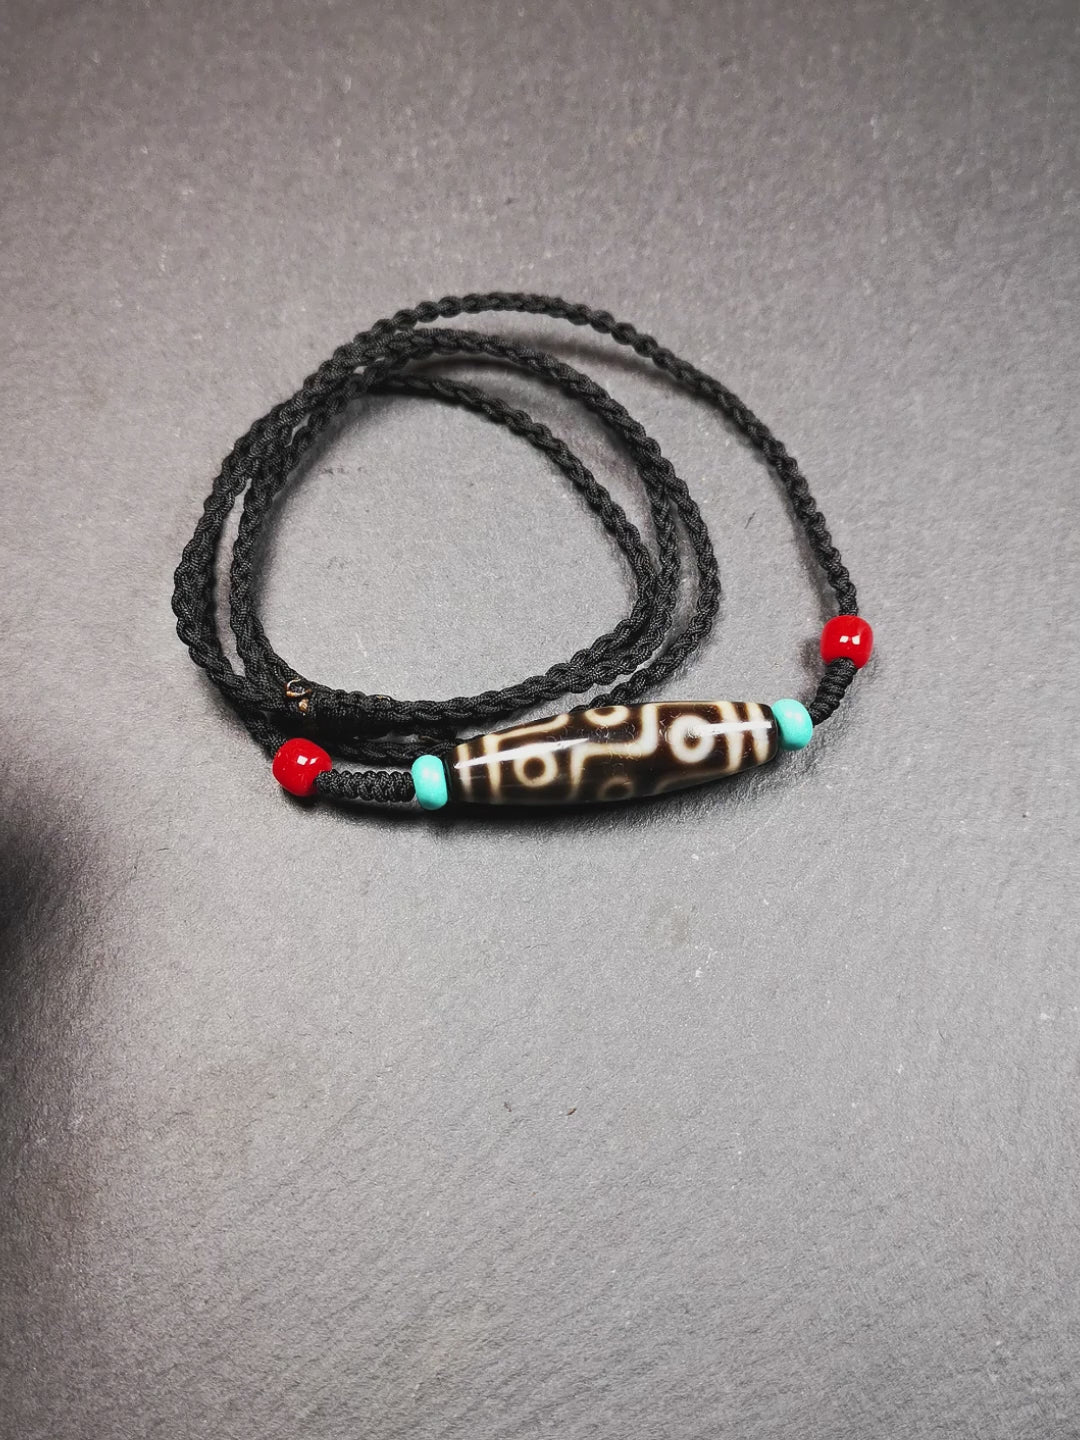 This 9 eyes dzi bead was collected from gerze Tibet,about 40 years old. The necklace was hand-woven by Tibetans from Baiyu County, the main bead is a brown color 9 eyes dzi, paired with 2 turquoise beads and 2 red agate beads.